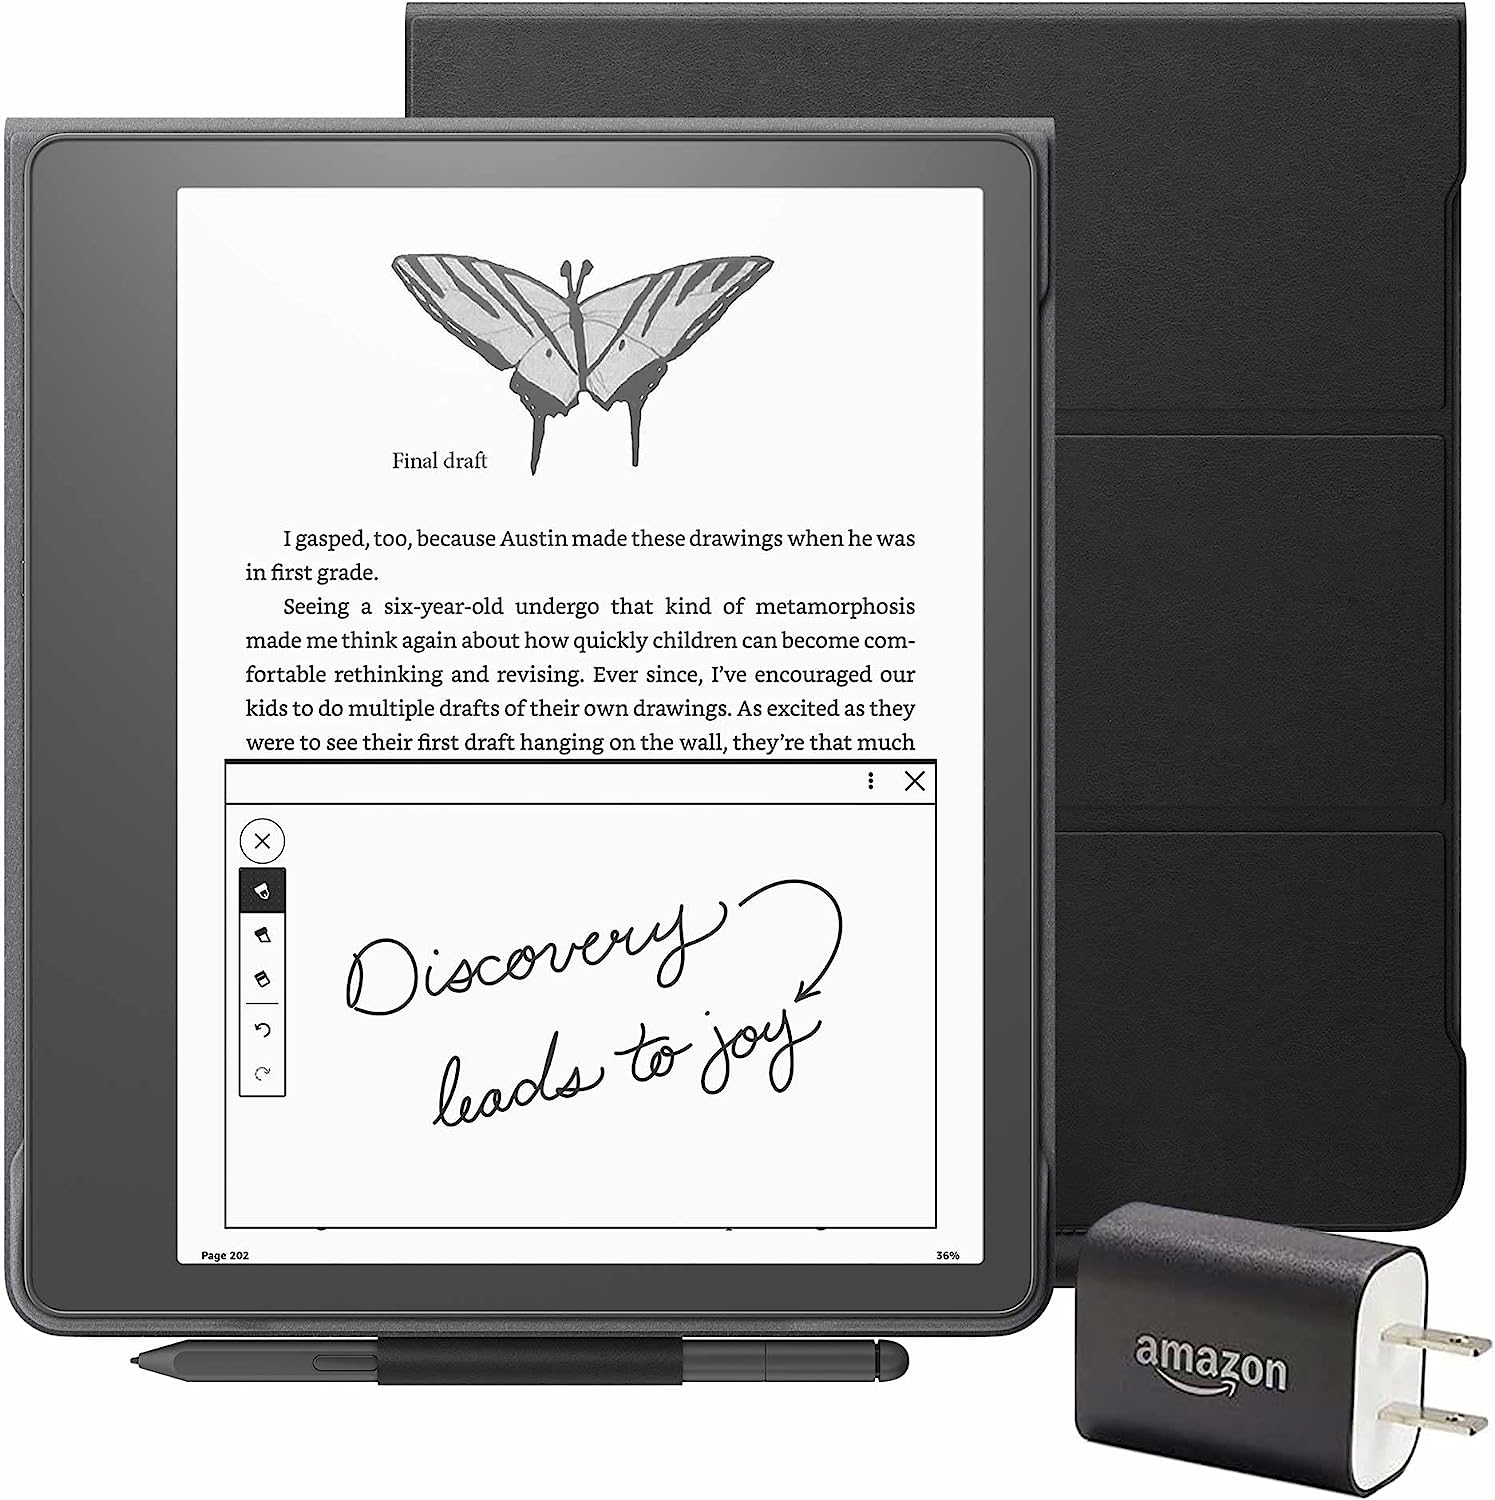 Kindle Scribe Essentials Bundle including Kindle Scribe (32 GB), Premium Pen, Leather Folio Cover with Magnetic Attach - Burgundy, and Power Adapter